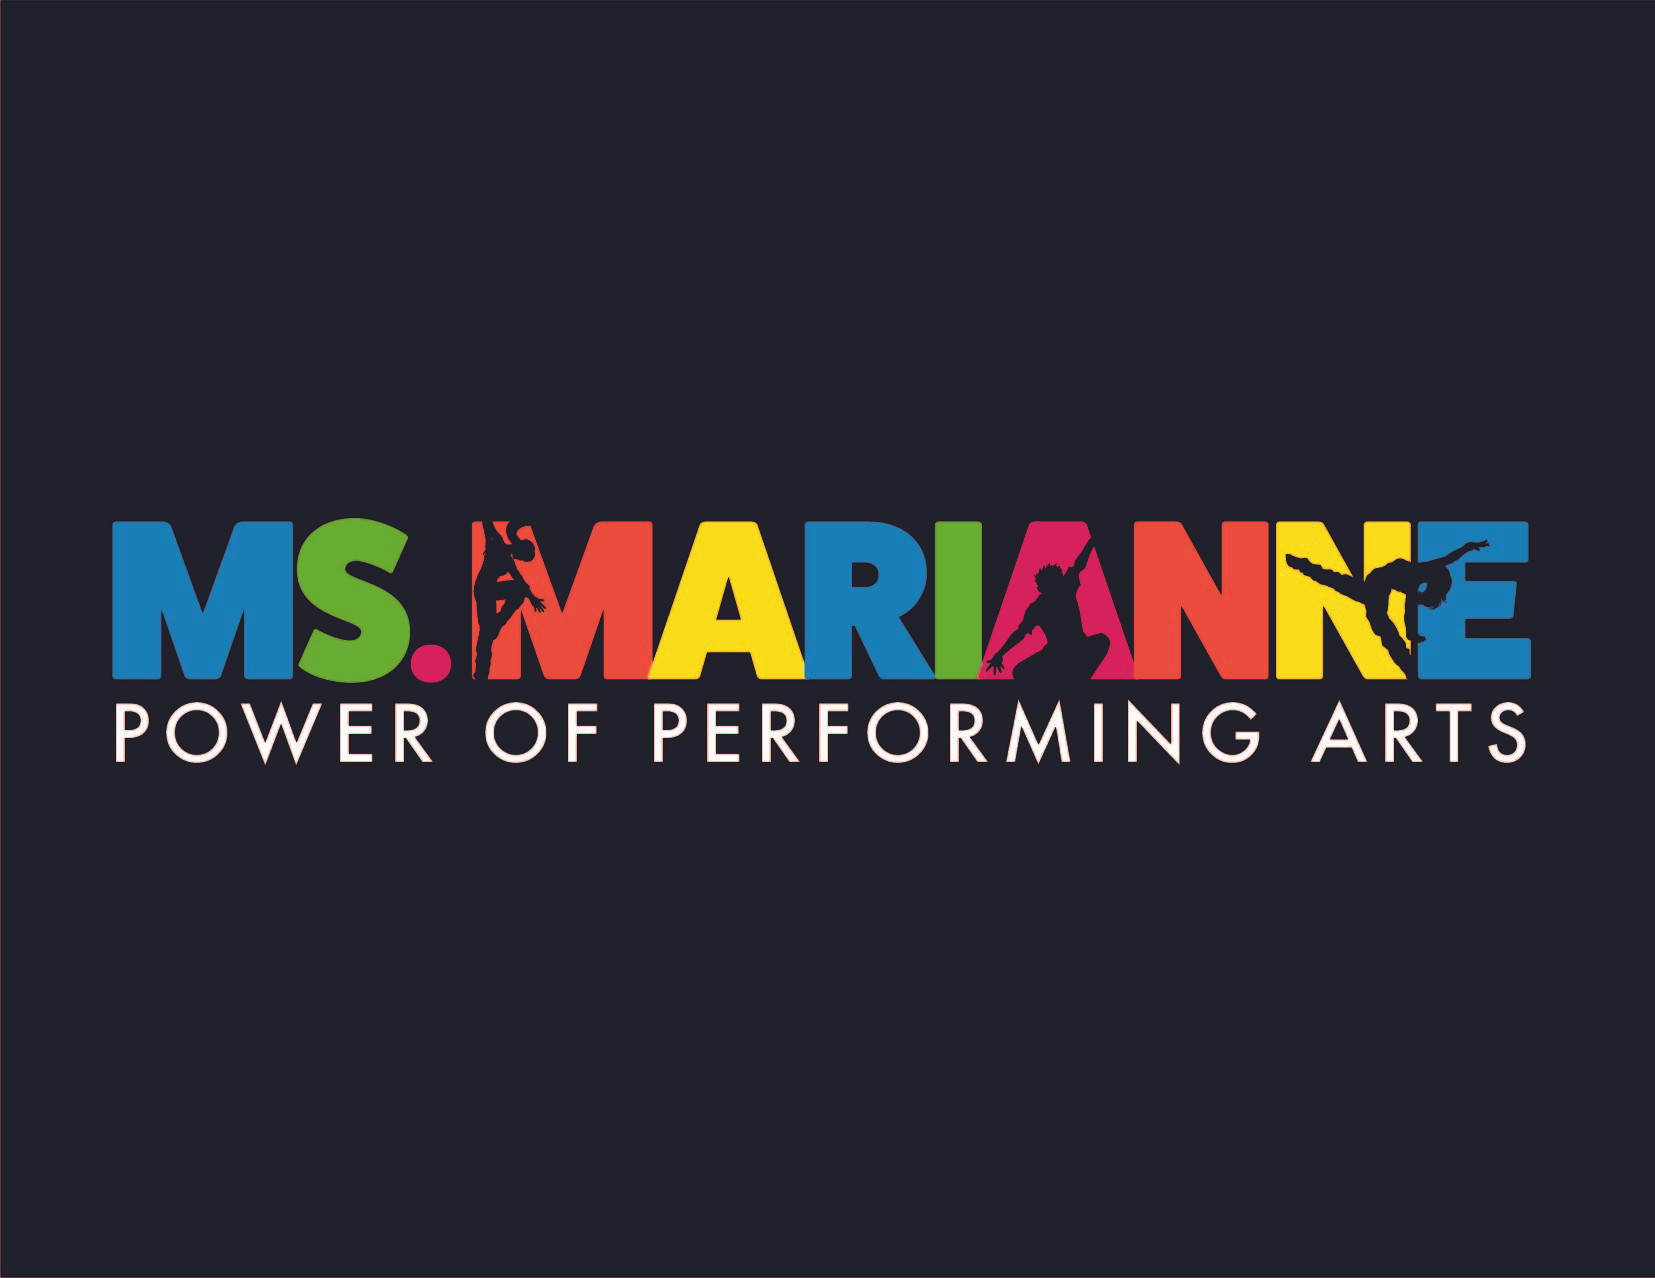 Ms. Marianne Power of Performing Arts